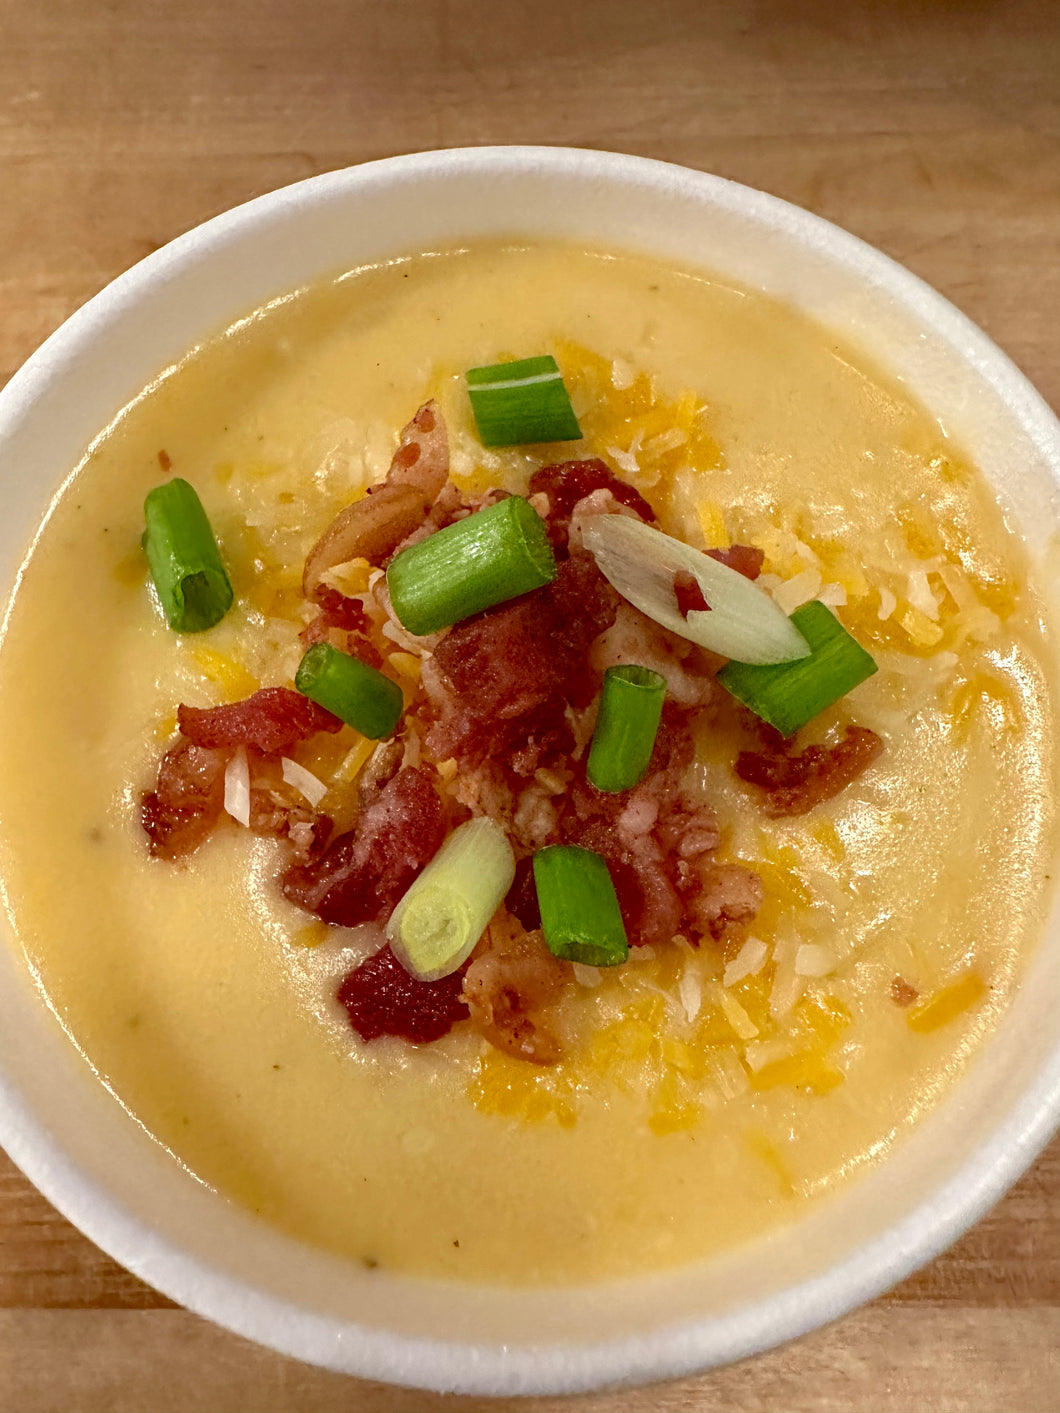 TODAY'S SPECIAL SOUP - Loaded Potato Soup